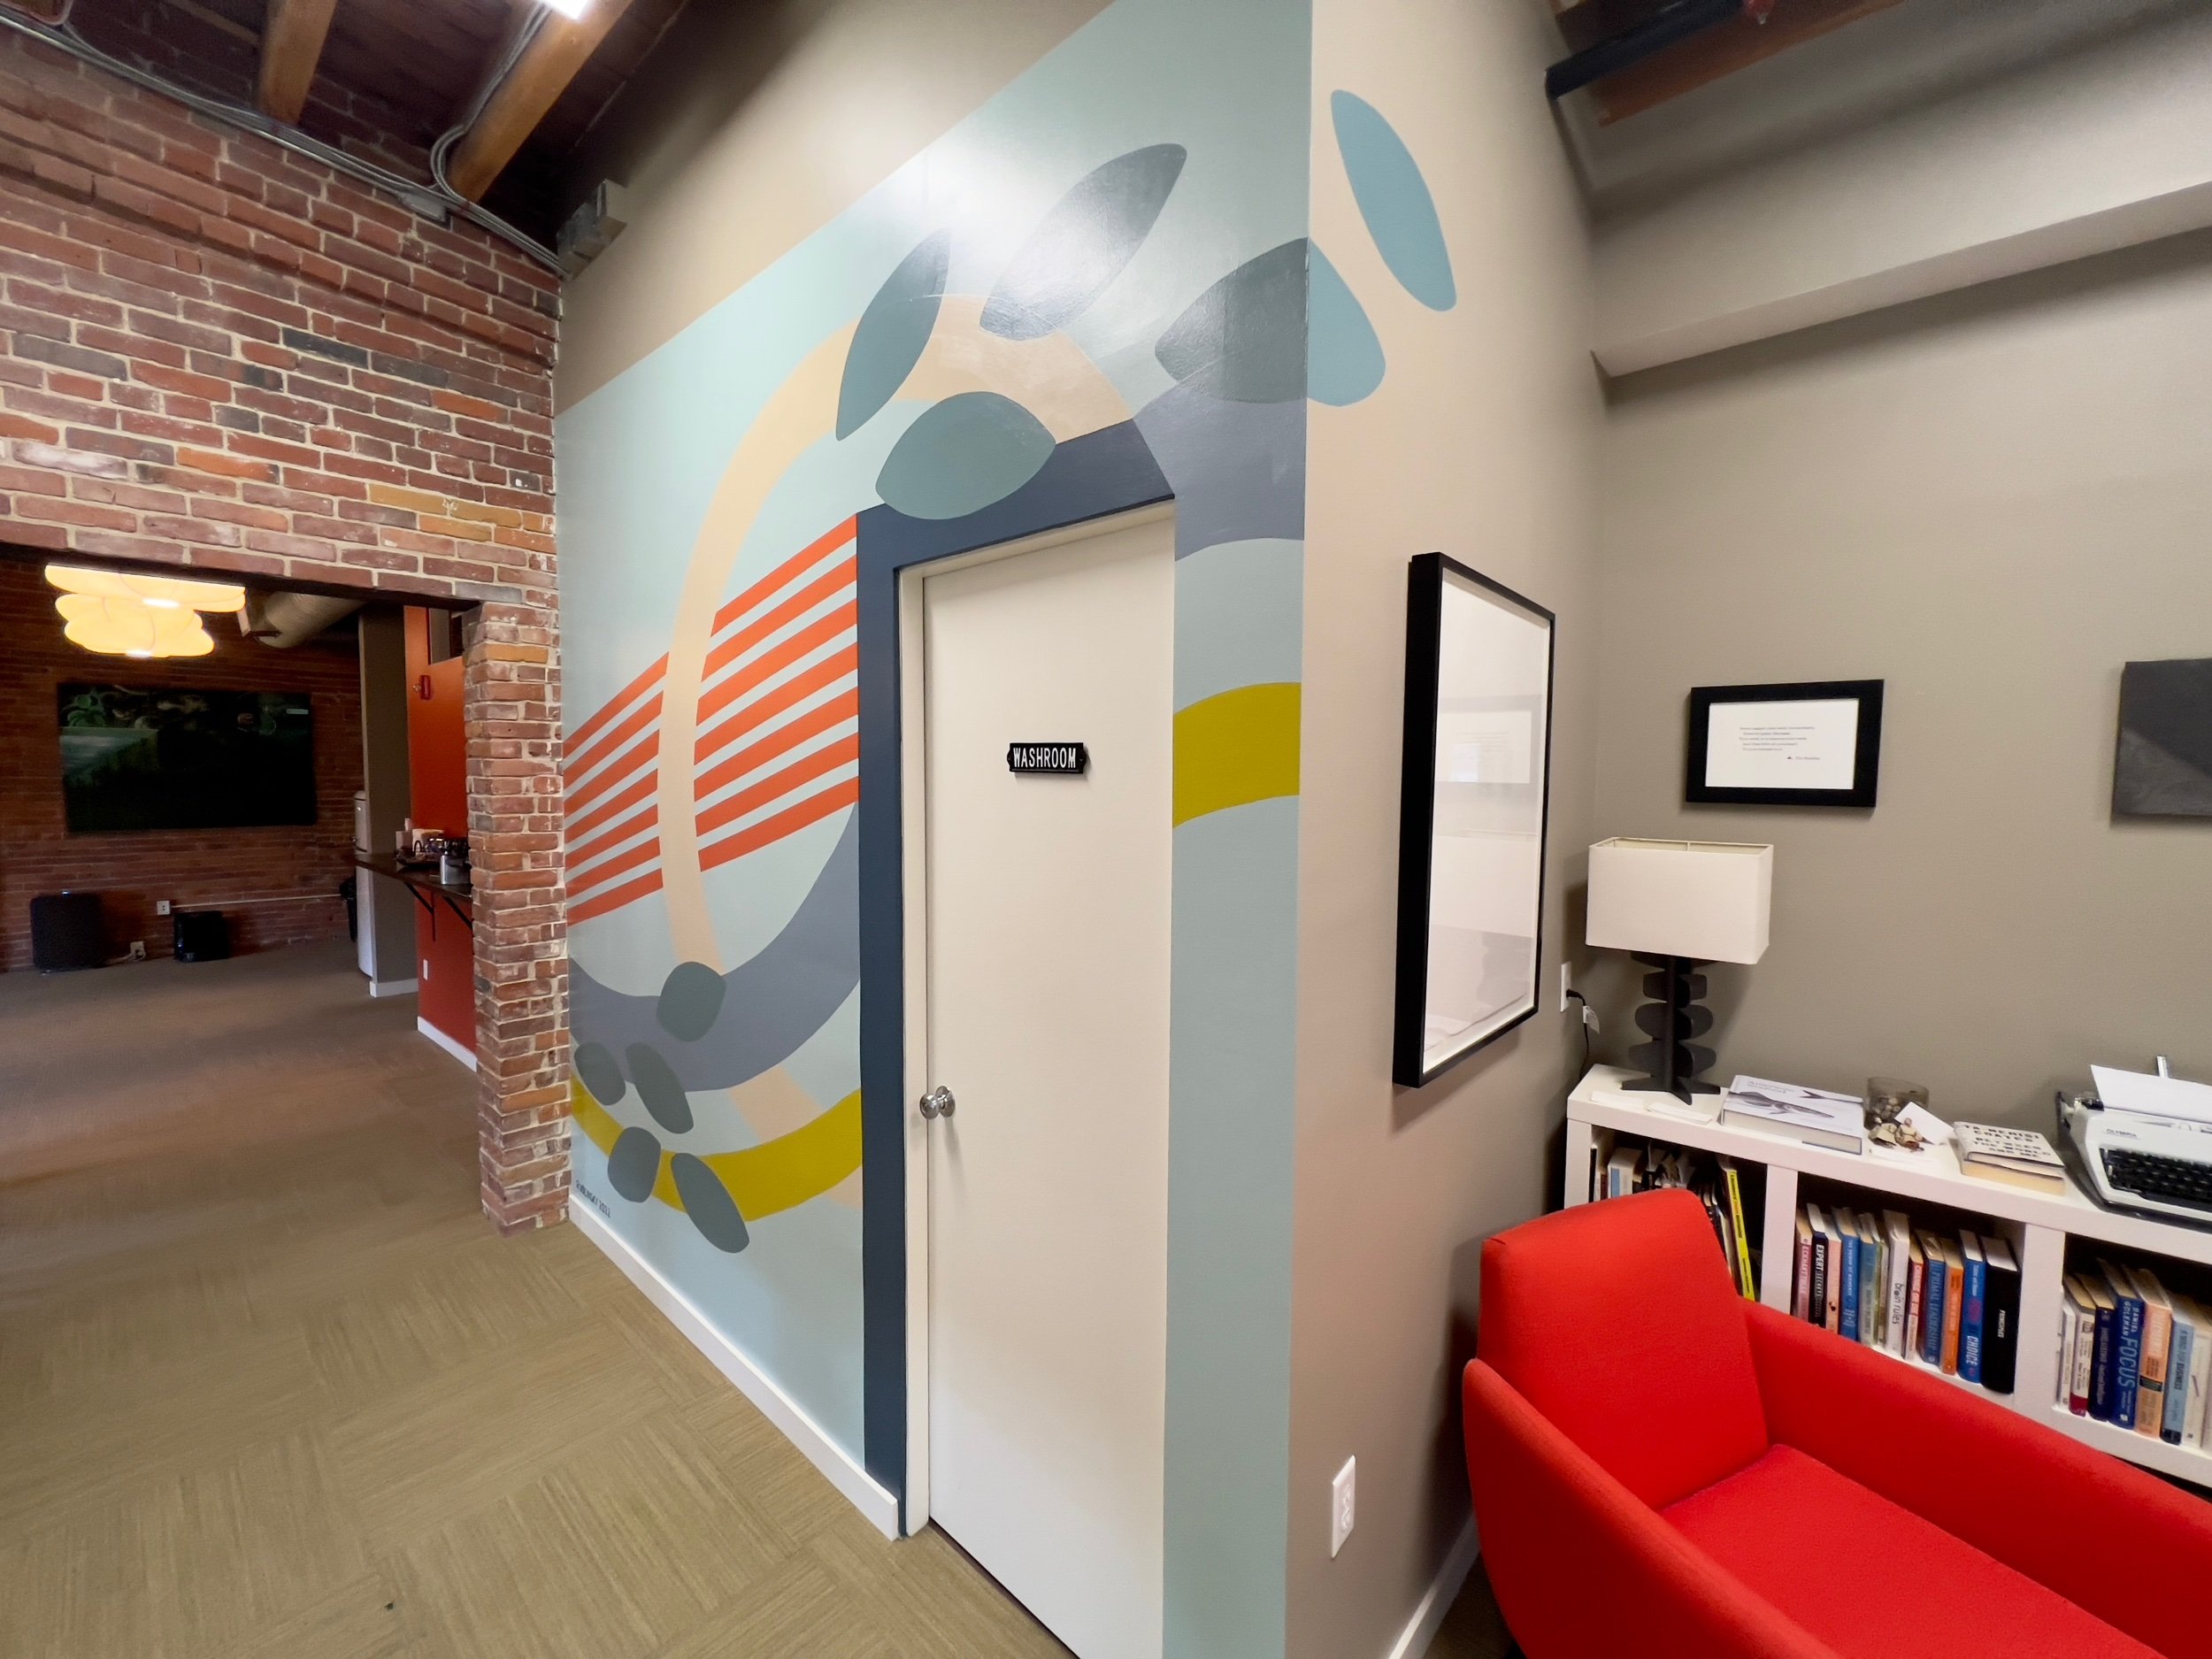   Commissioned mural for  the office of Seth Rigoletti  in Portland, Maine. This interior mural was designed and painted by hand in December 2022.  